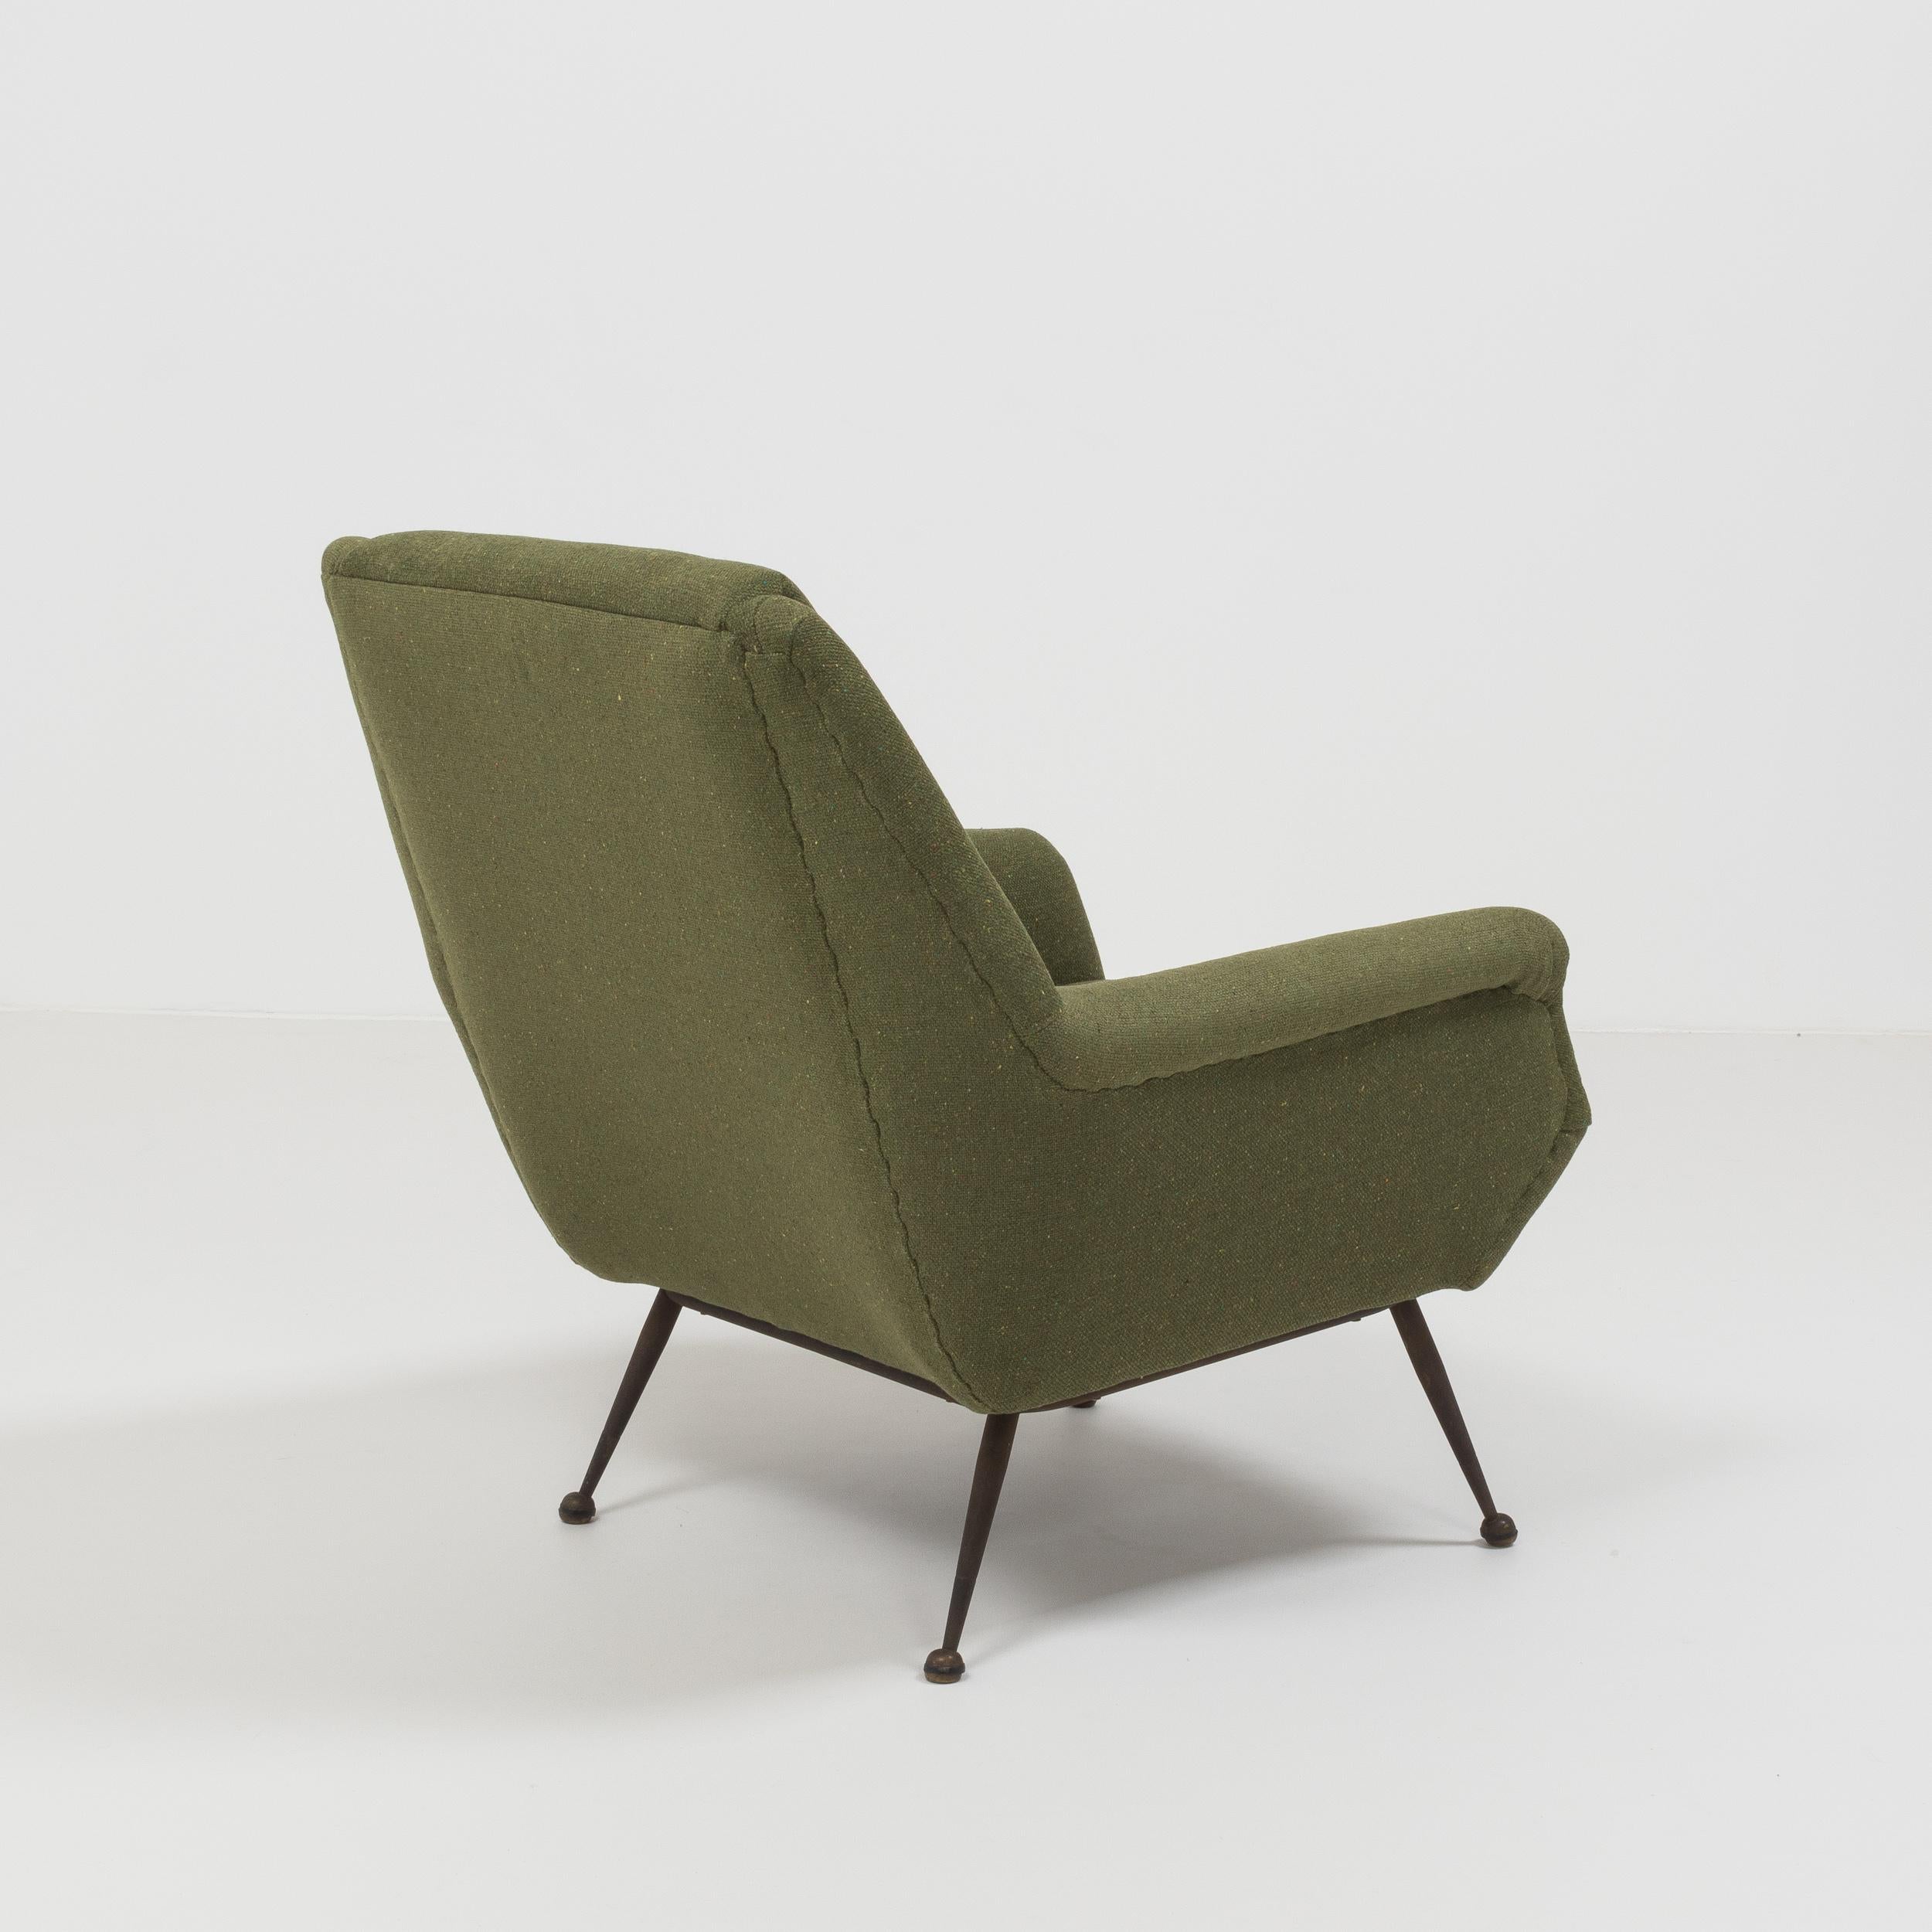 European Midcentury Lounge Chair by Gio Ponti for Minotti in Green Fabric